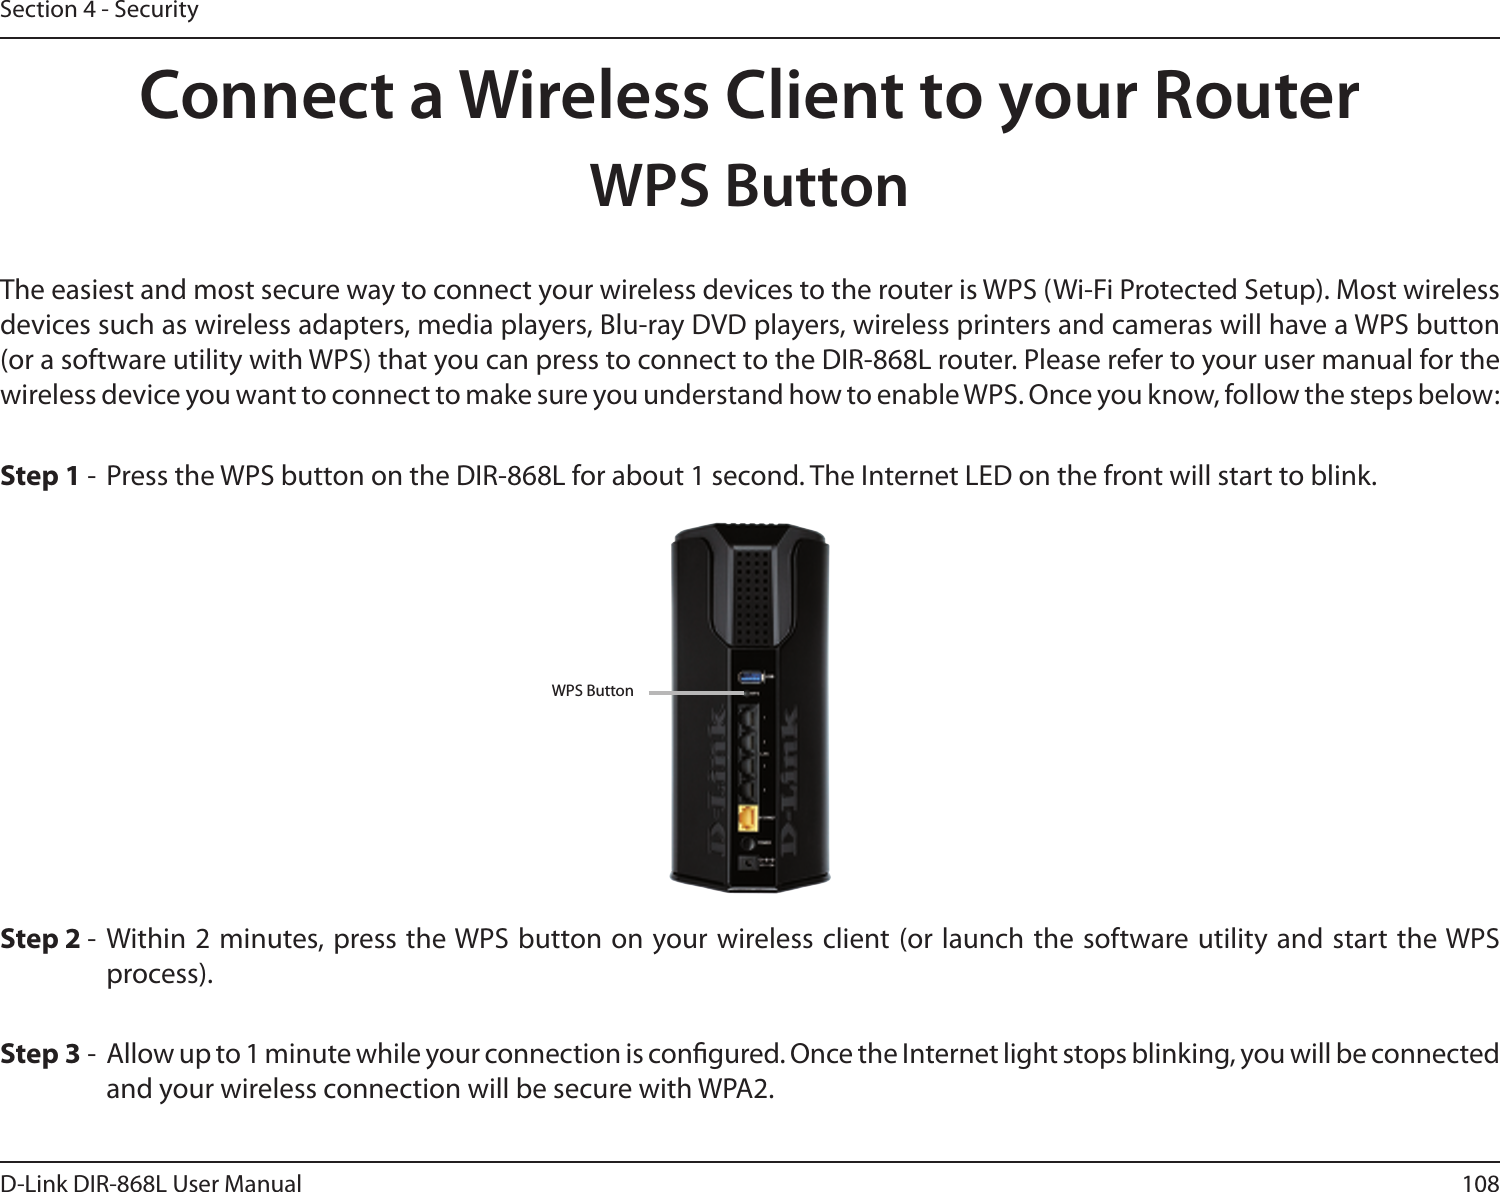 108D-Link DIR-868L User ManualSection 4 - SecurityConnect a Wireless Client to your RouterWPS ButtonStep 2 -  Within 2 minutes, press the WPS button on your wireless client (or launch the software utility and start the WPS process).The easiest and most secure way to connect your wireless devices to the router is WPS (Wi-Fi Protected Setup). Most wireless devices such as wireless adapters, media players, Blu-ray DVD players, wireless printers and cameras will have a WPS button (or a software utility with WPS) that you can press to connect to the DIR-868L router. Please refer to your user manual for the wireless device you want to connect to make sure you understand how to enable WPS. Once you know, follow the steps below:Step 1 -  Press the WPS button on the DIR-868L for about 1 second. The Internet LED on the front will start to blink.Step 3 -  Allow up to 1 minute while your connection is congured. Once the Internet light stops blinking, you will be connected and your wireless connection will be secure with WPA2.WPS Button